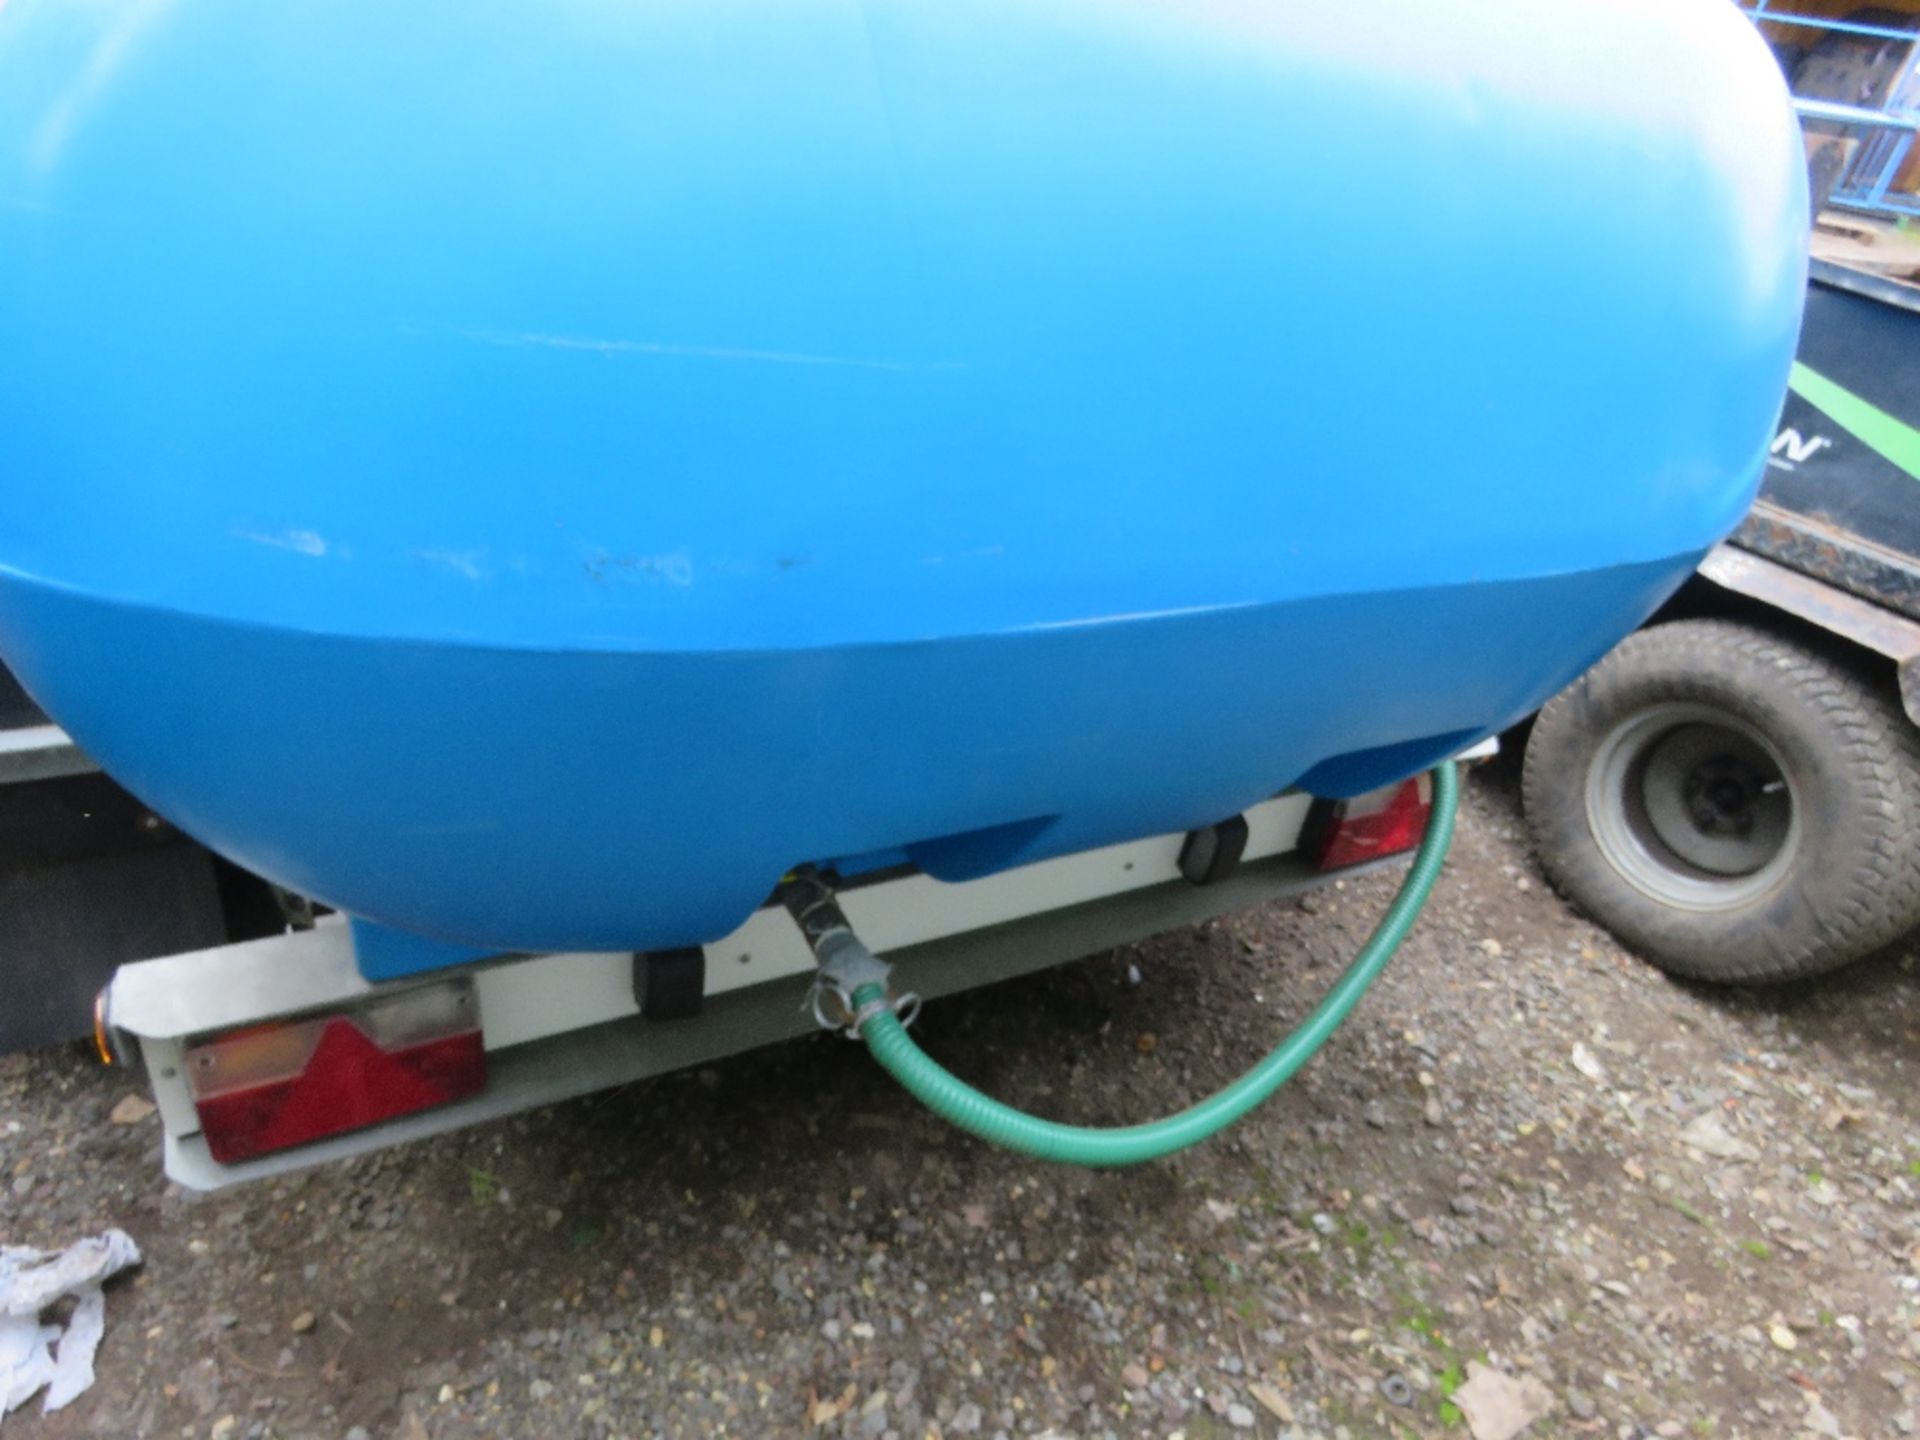 TRAILER ENGINEERING SINGLE AXLED WATER BOWSER WITH HONDA WATER PUMP. OWNER DOWNSIZING SO SURPLUS TO - Image 6 of 7